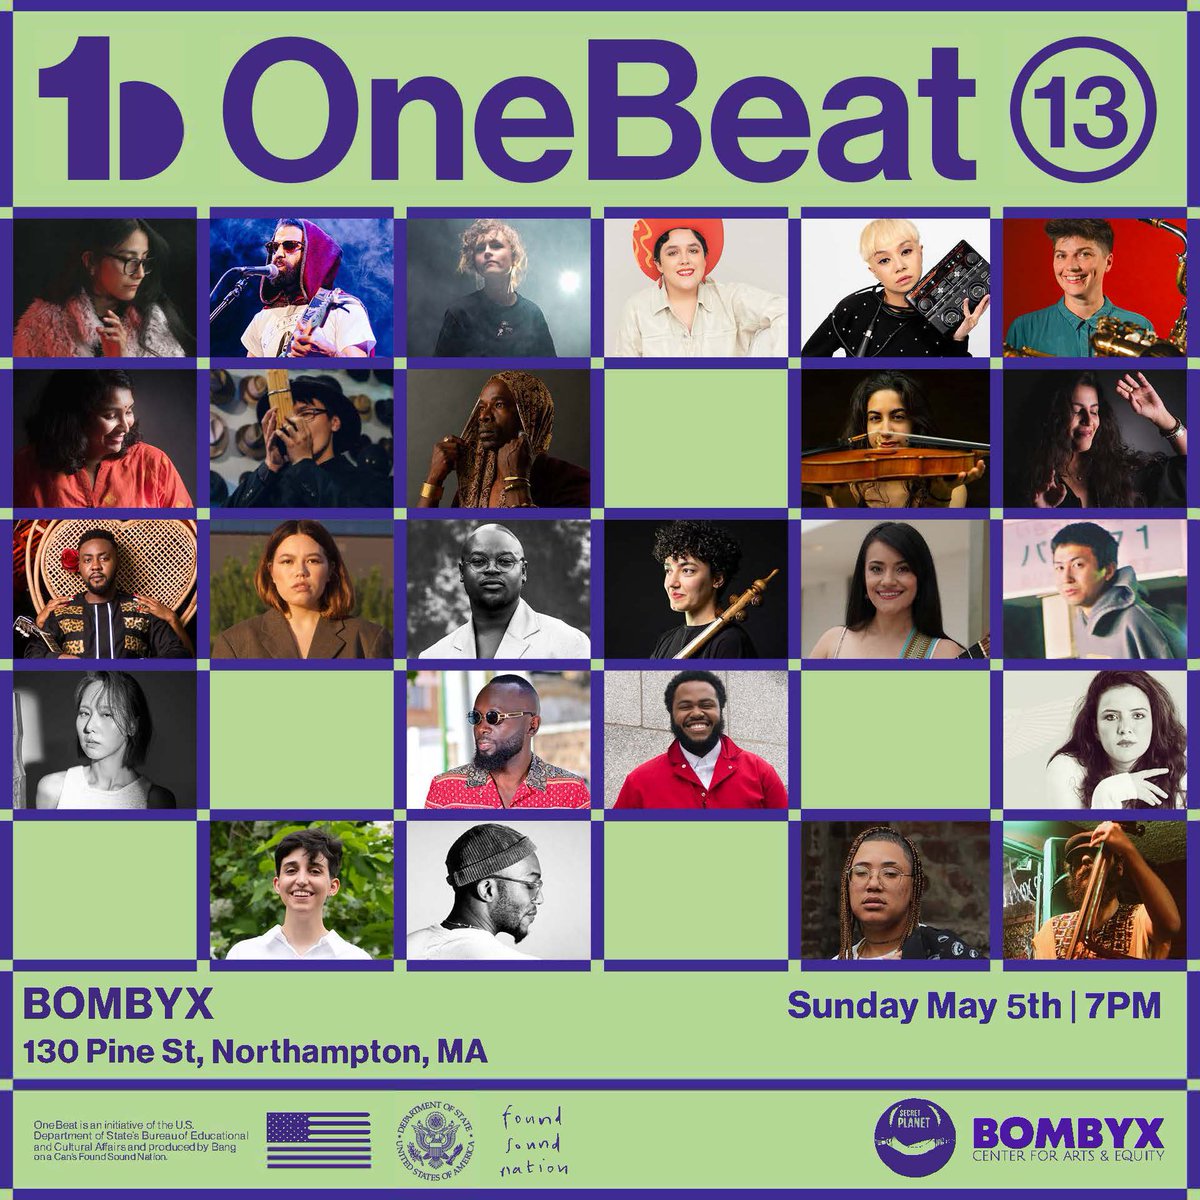 Sunday May 6th the OneBeat 13 Fellows will be playing at BOMBYX in Northampton, MA at 7pm! Tell a friend and grab your tickets here:  secretplanet.live/onebeat

@ECAatState

#culturaldiplomacy #exchangeourworld